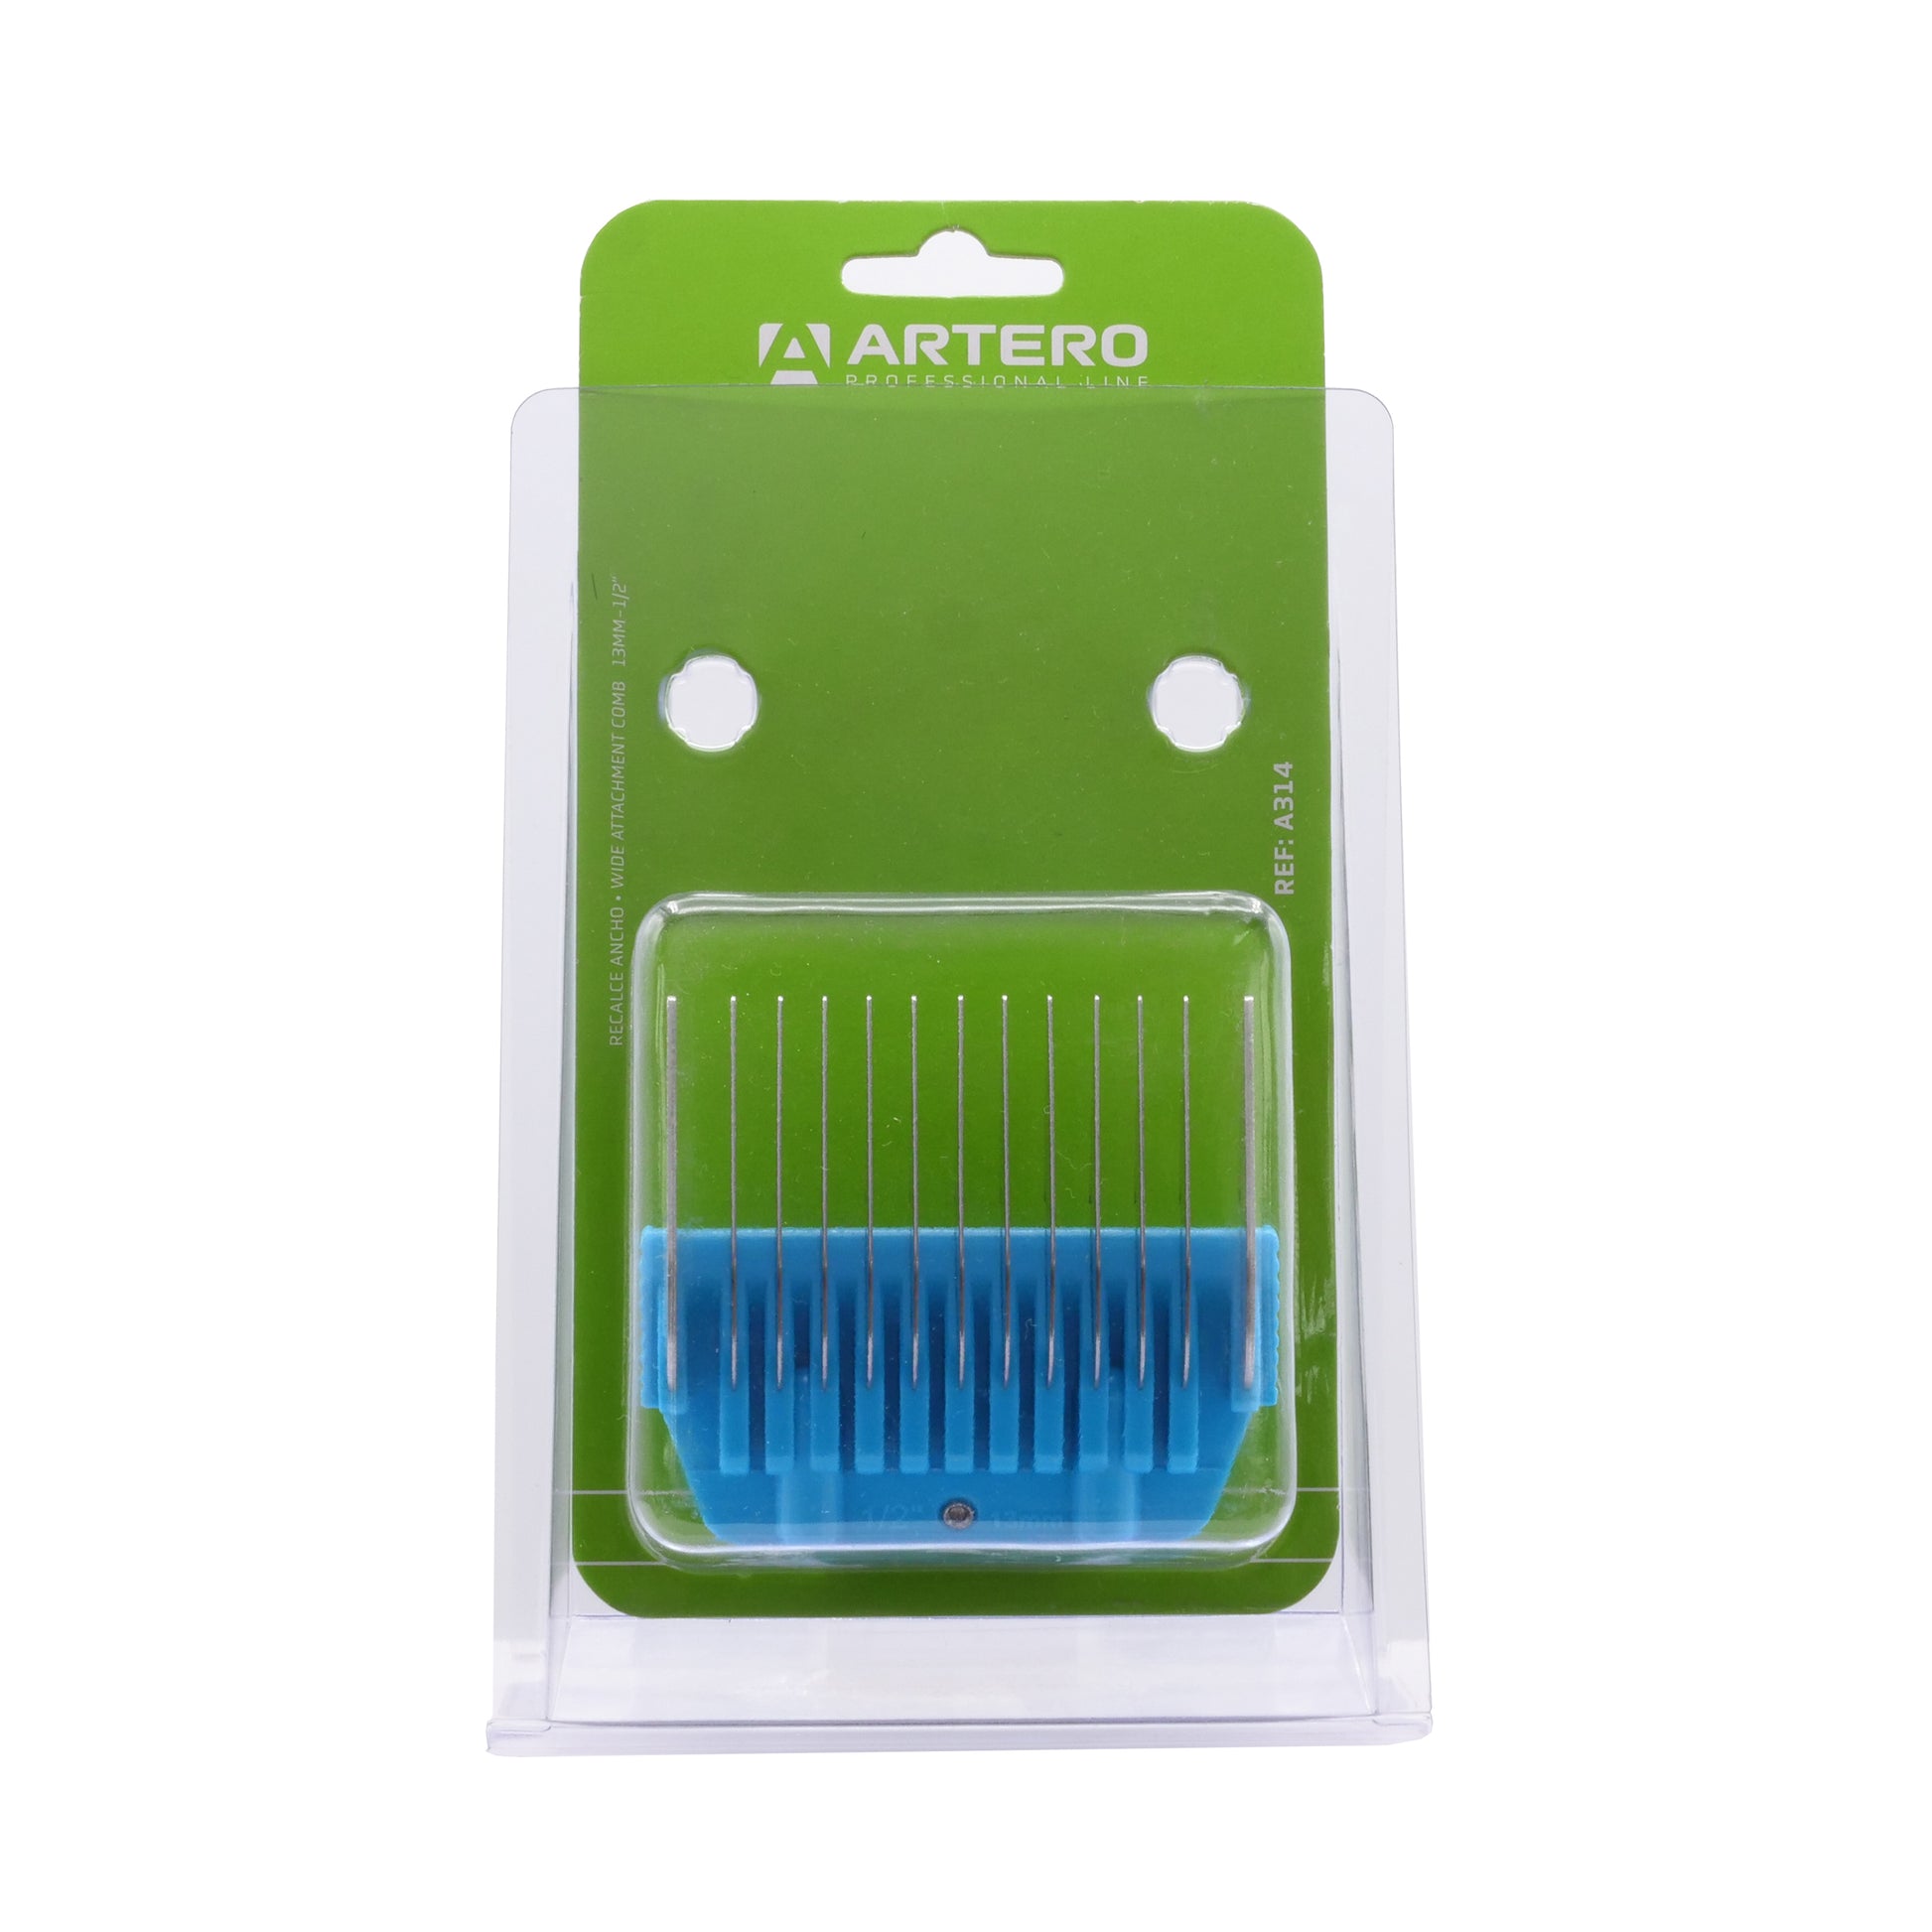 The Artero Wide Snap-On Metal Comb 13mm - 1/2" is designed for use with the Artero A5 wide clipper blade and offers a smooth, even finish. This comb is also compatible with Andis, Moser, Heiniger, Oster, and Aesculap Fav5 and Fav5 CL blades. Features: Cutting height: 1/2" Metal Construction Fits A5 Clippers